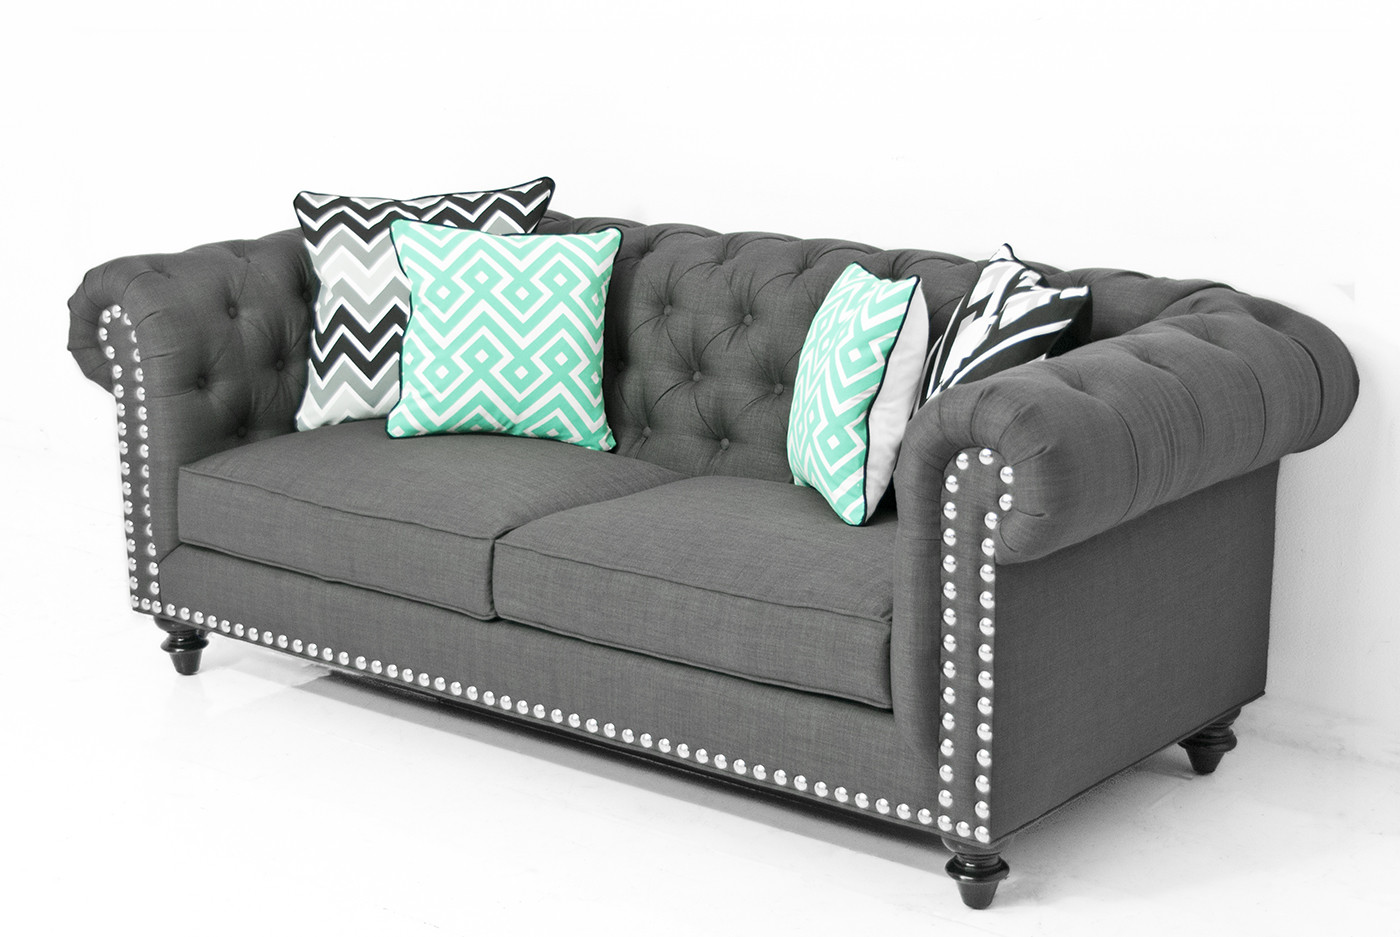 Awesome Chesterfield Sofa in Charcoal Linen linen chesterfield sofa